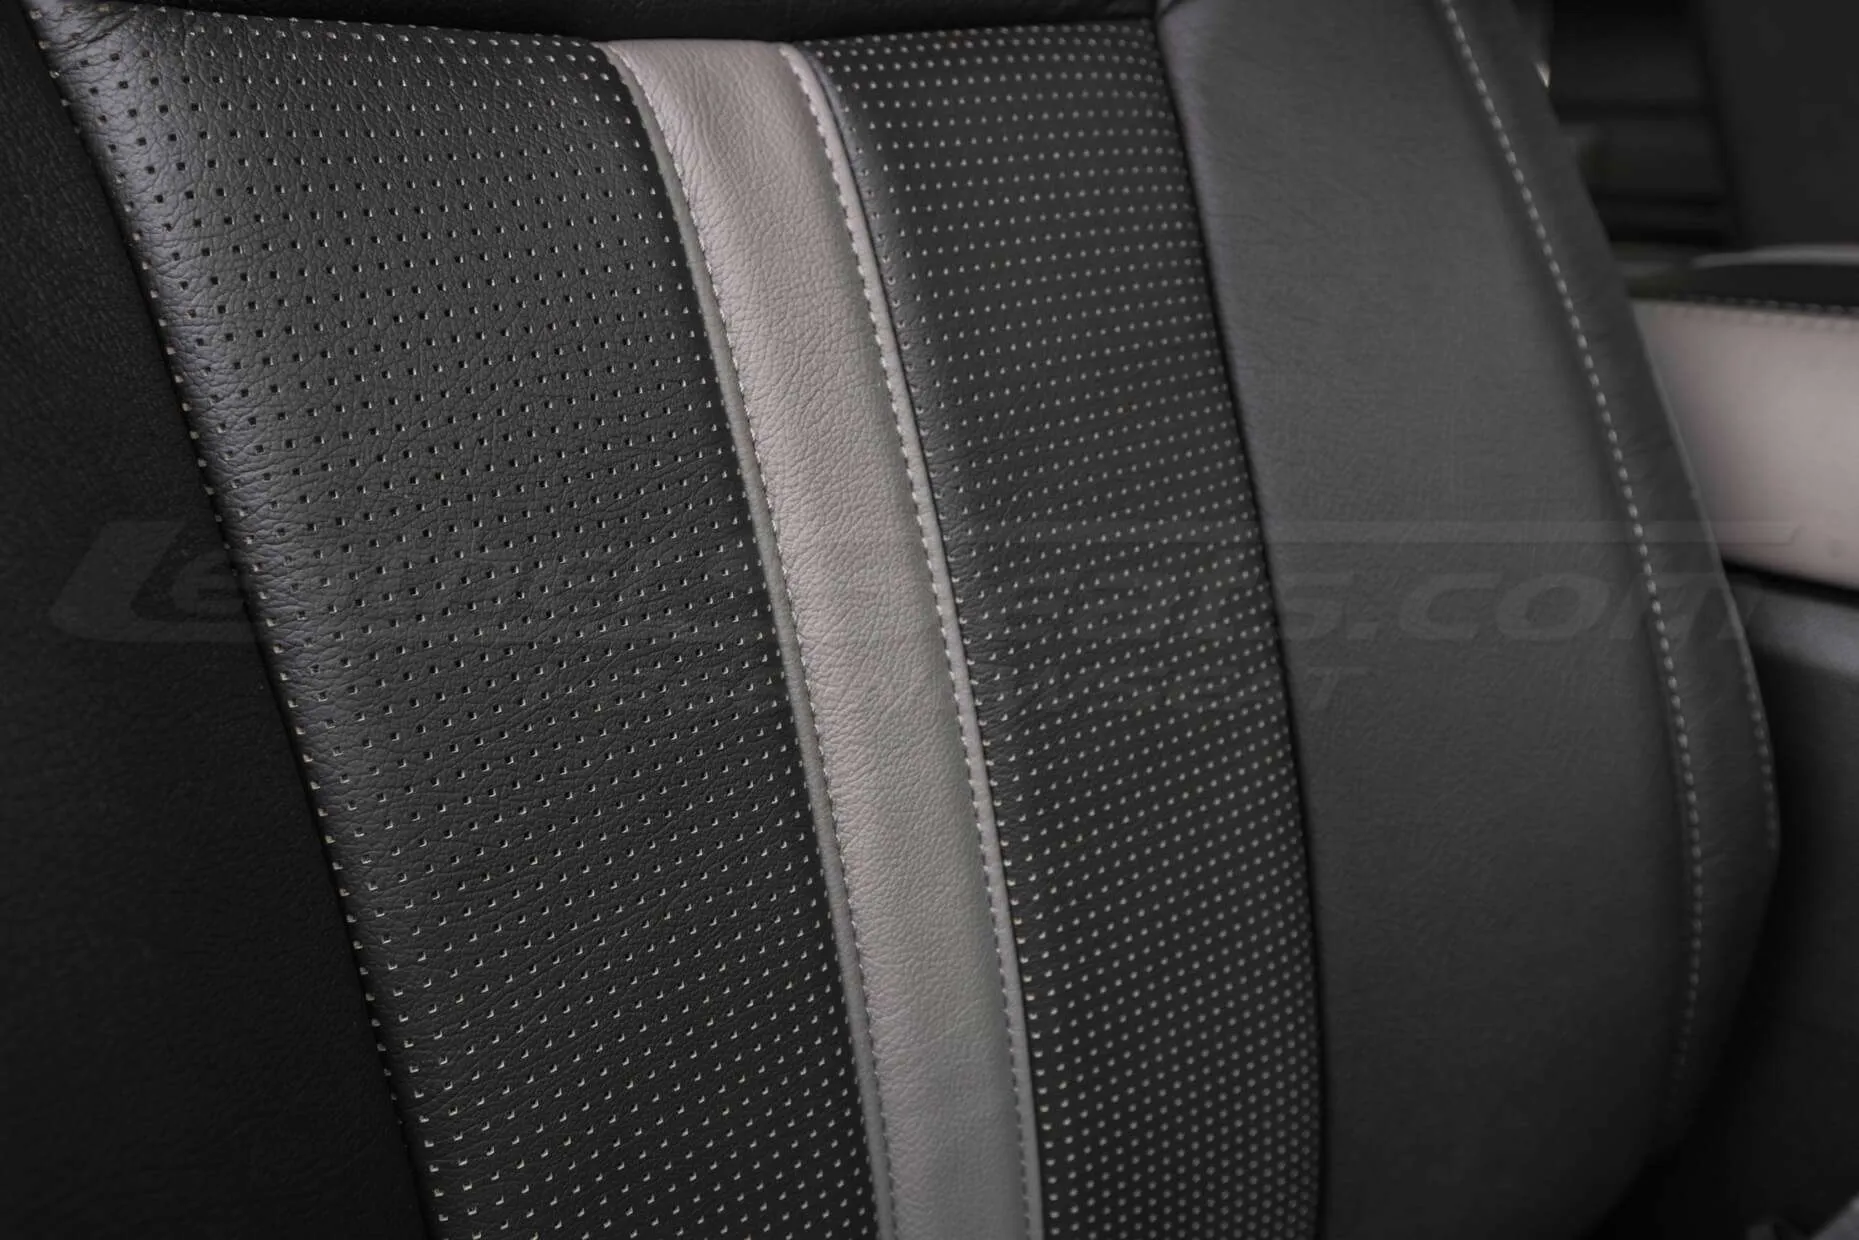 Ford F-150 installed leather kit - Black & Piazza Grey - Piazza Perforation close-up